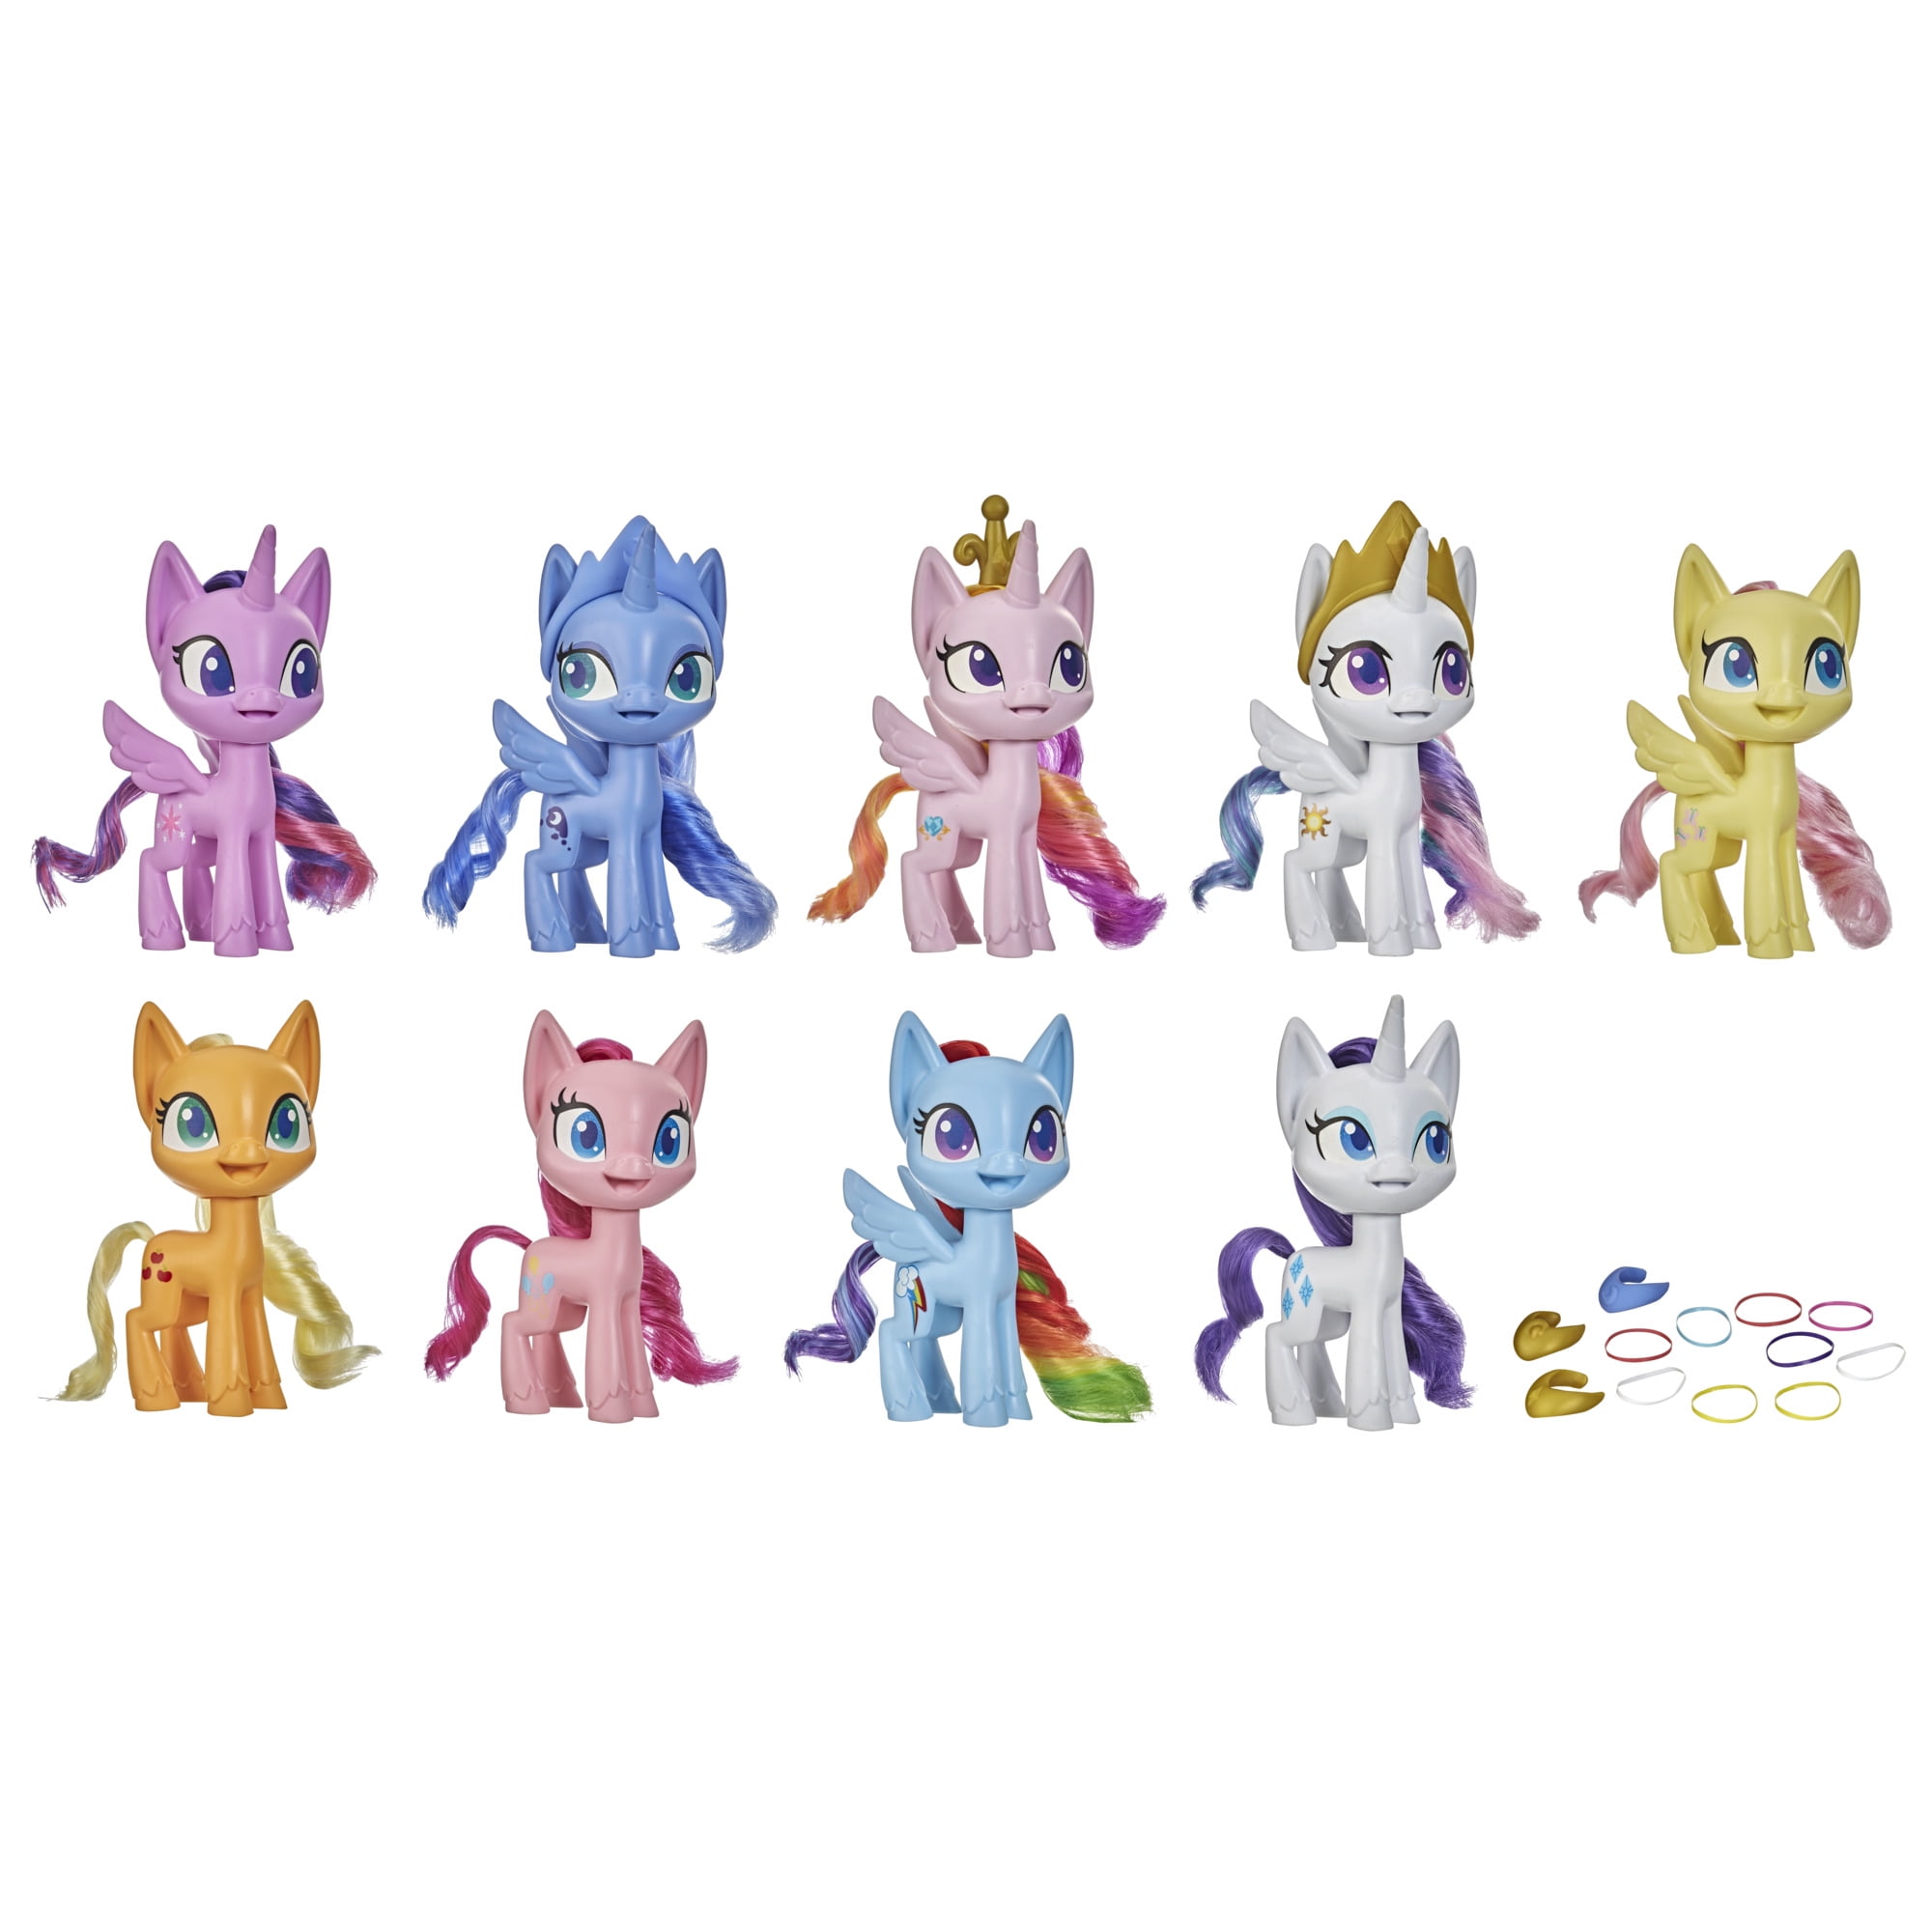 My Little Pony Mega Friendship Collection w/ 9 5" Ponies & Surprise Accessories $14.38 + Free Shipping w/ Walmart+ or on $35+